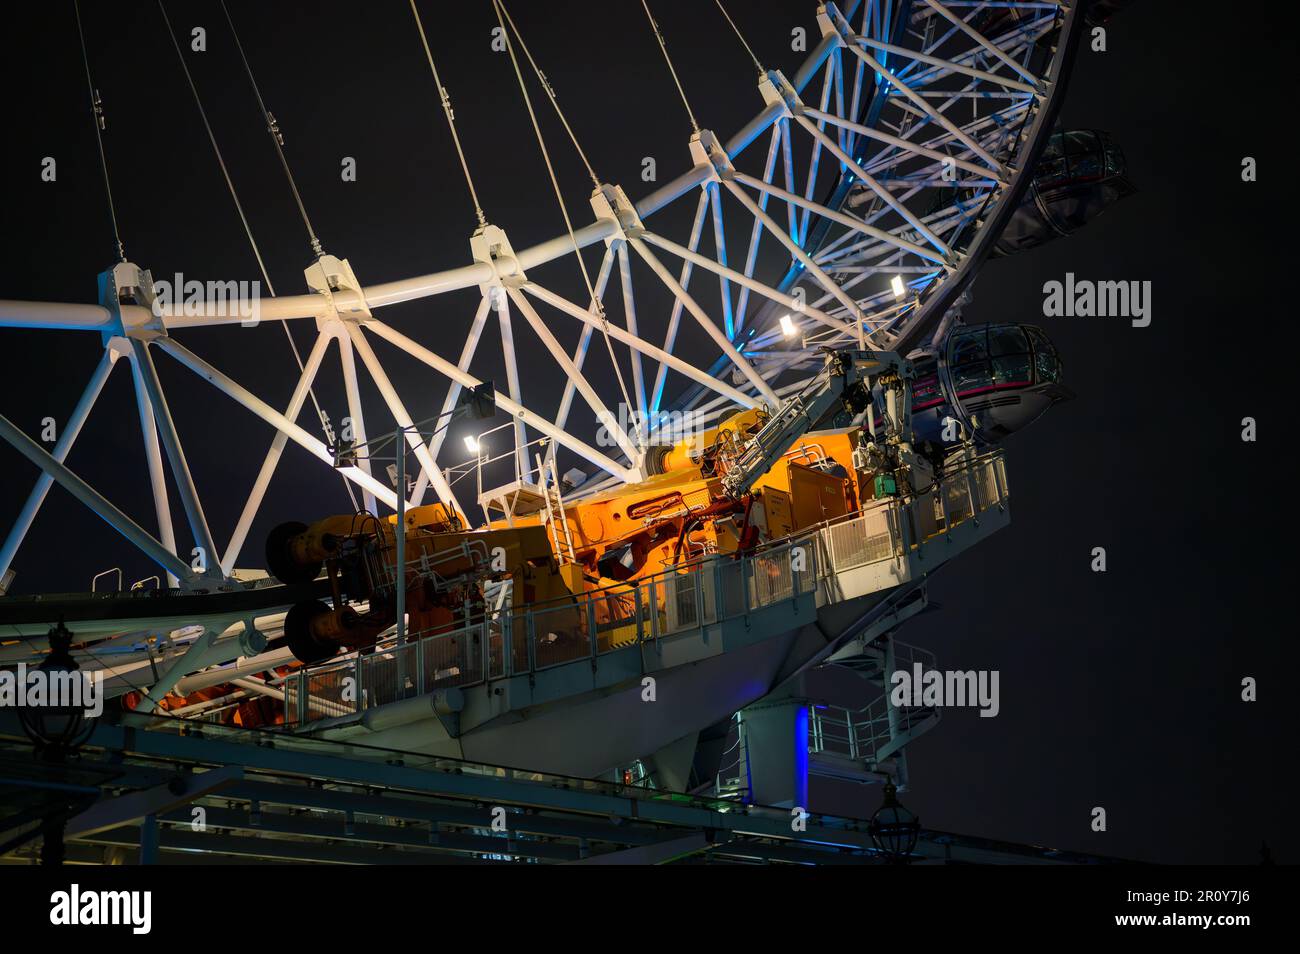 LONDON - April 21, 2023: Get a closer look at the London Eye's intricate drive mechanism in stunning illuminated detail, showcasing the precision and Stock Photo